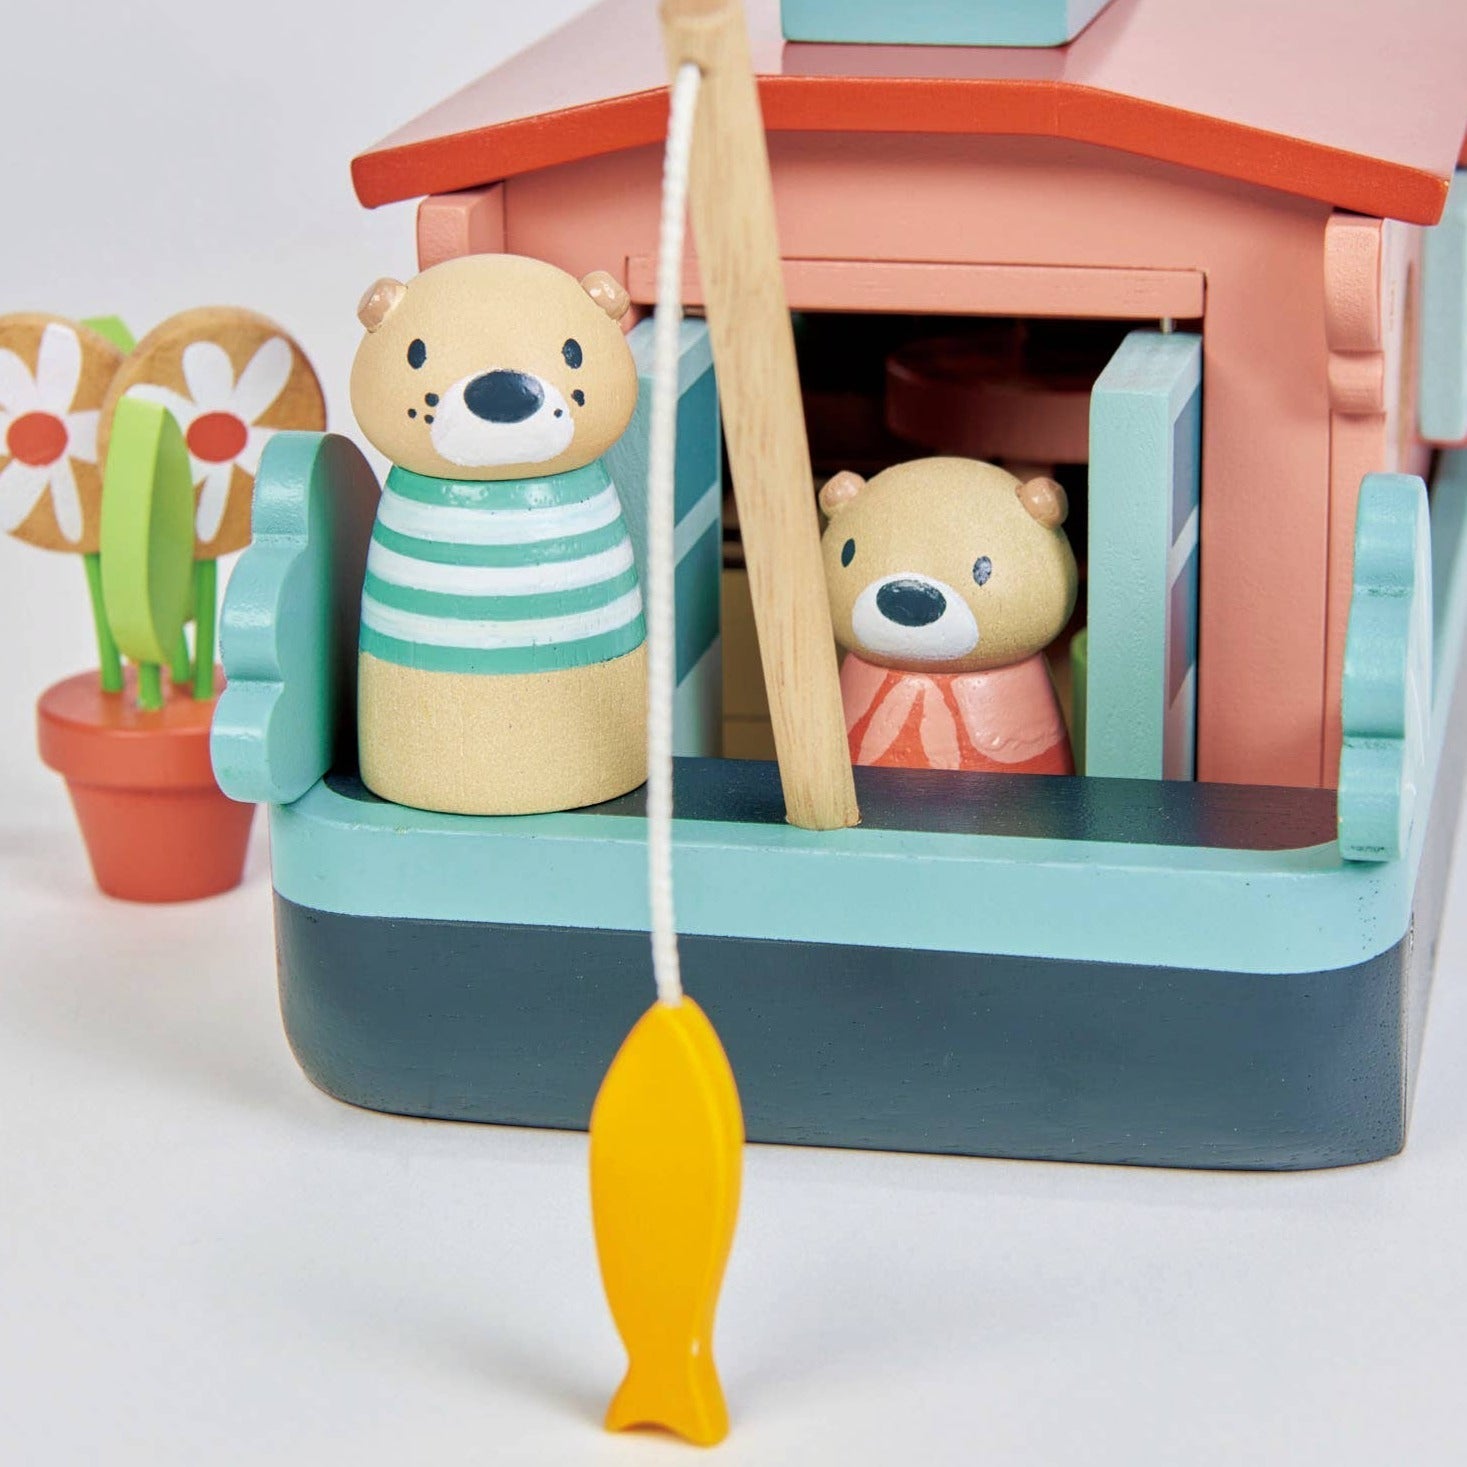 Little Otter Canal Boat, Introducing the Little Otter Canal Boat, where our adorable wooden otter doll family resides. This beautiful canal boat, named "Malardeau" after their favorite mallard duck, is a delightful addition to our wooden toy range.The removable roof and lift-out cabin provide extra play space and make this doll's house boat perfect for imaginative playtime. The Little Otter Canal Boat set also includes a variety of accessories designed to support language development, emotional awareness, a